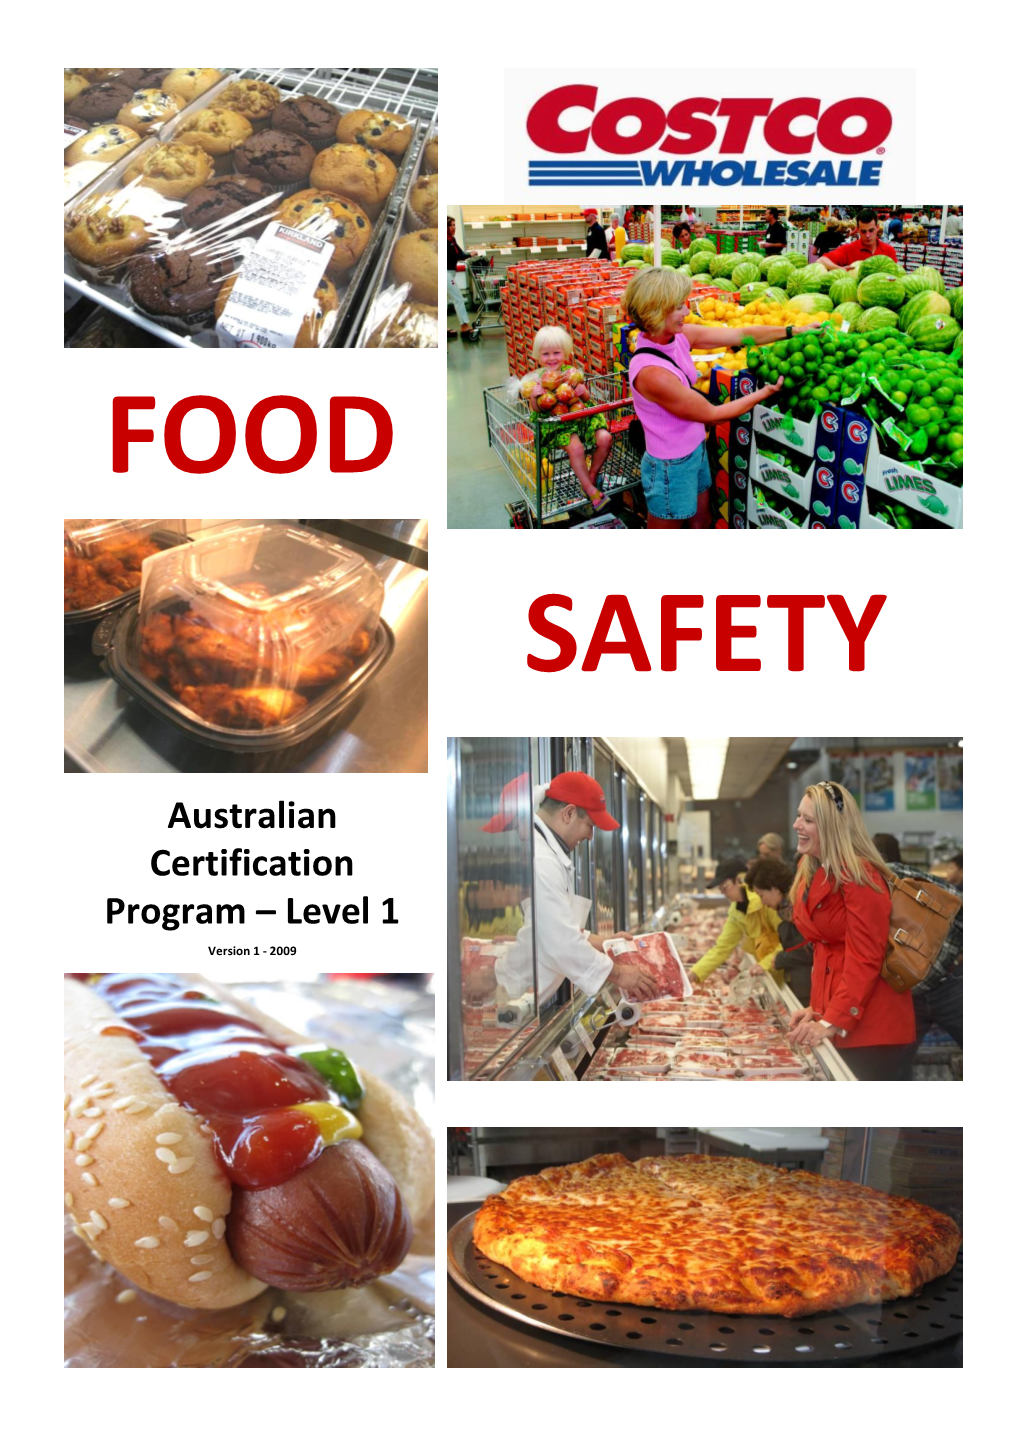 Welcome to Costco's Food Safety Program